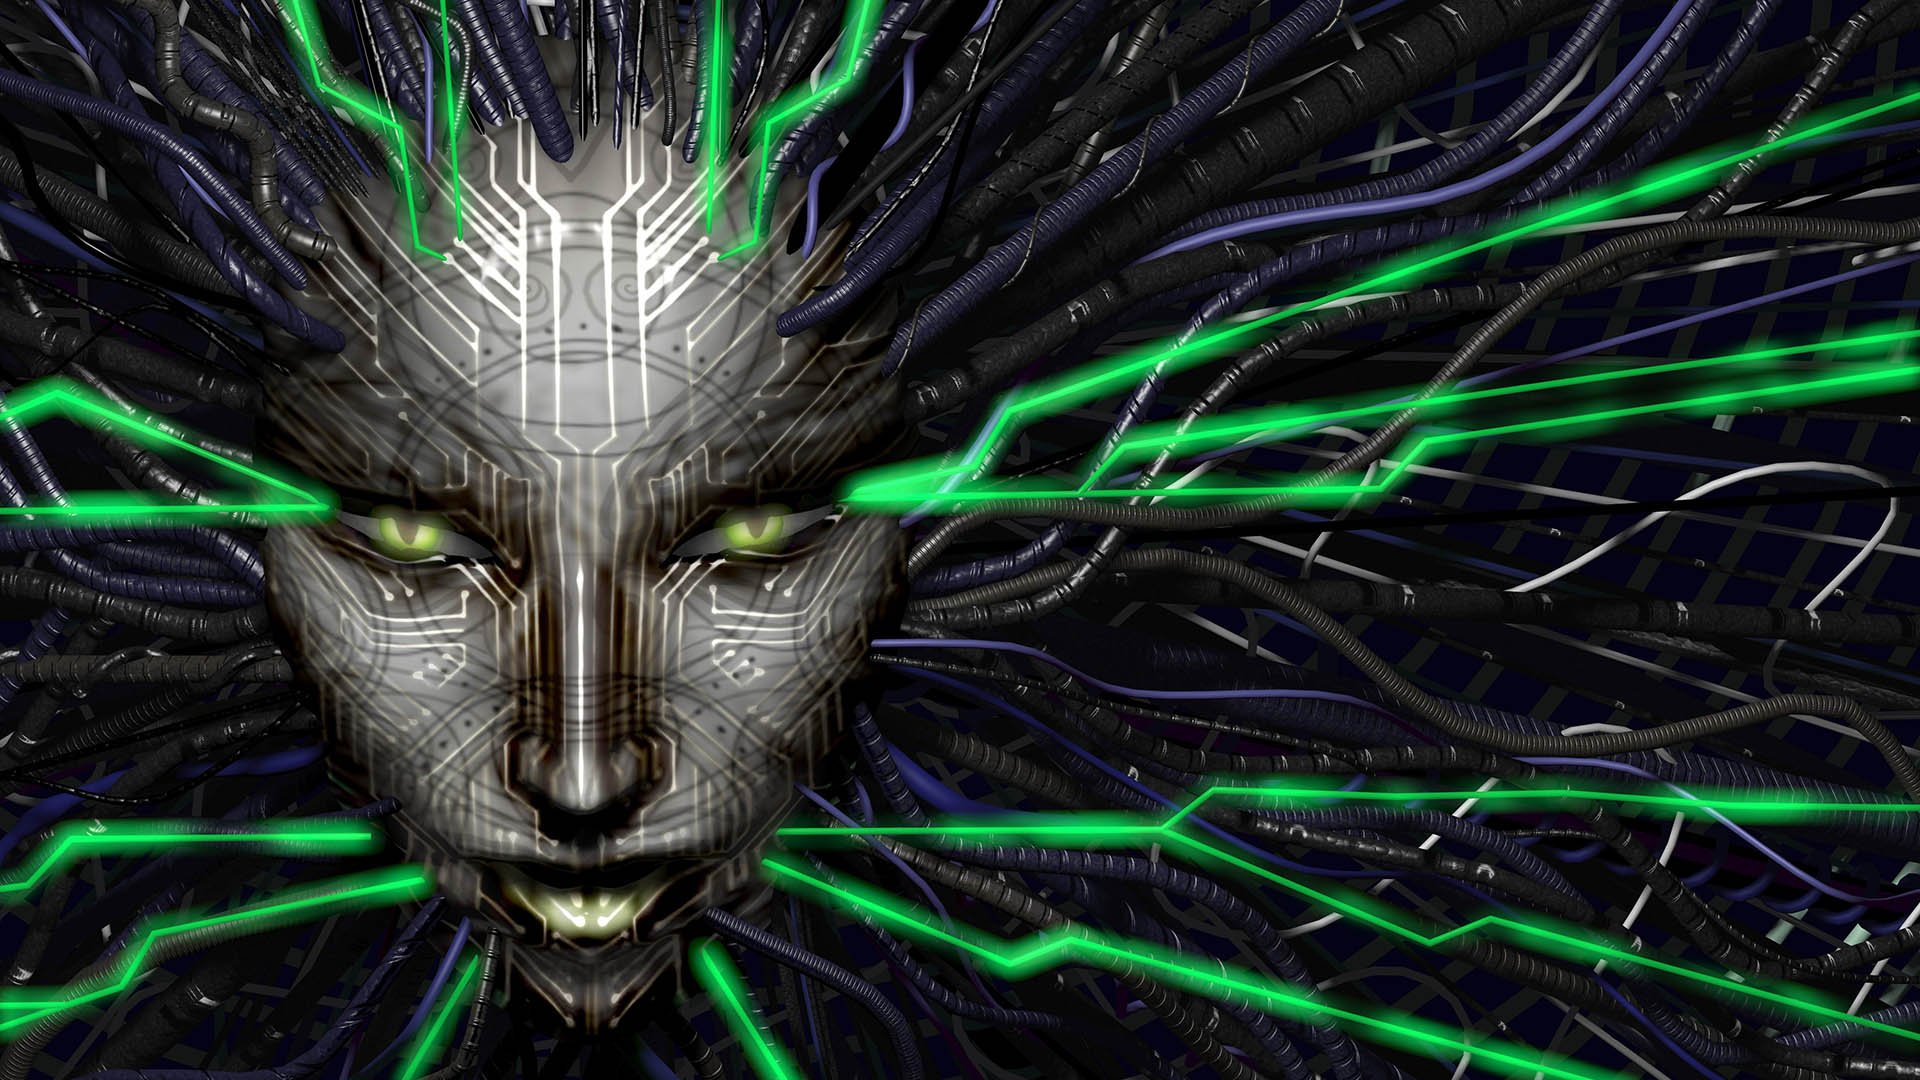 system shock 2 rebirth without hybrid